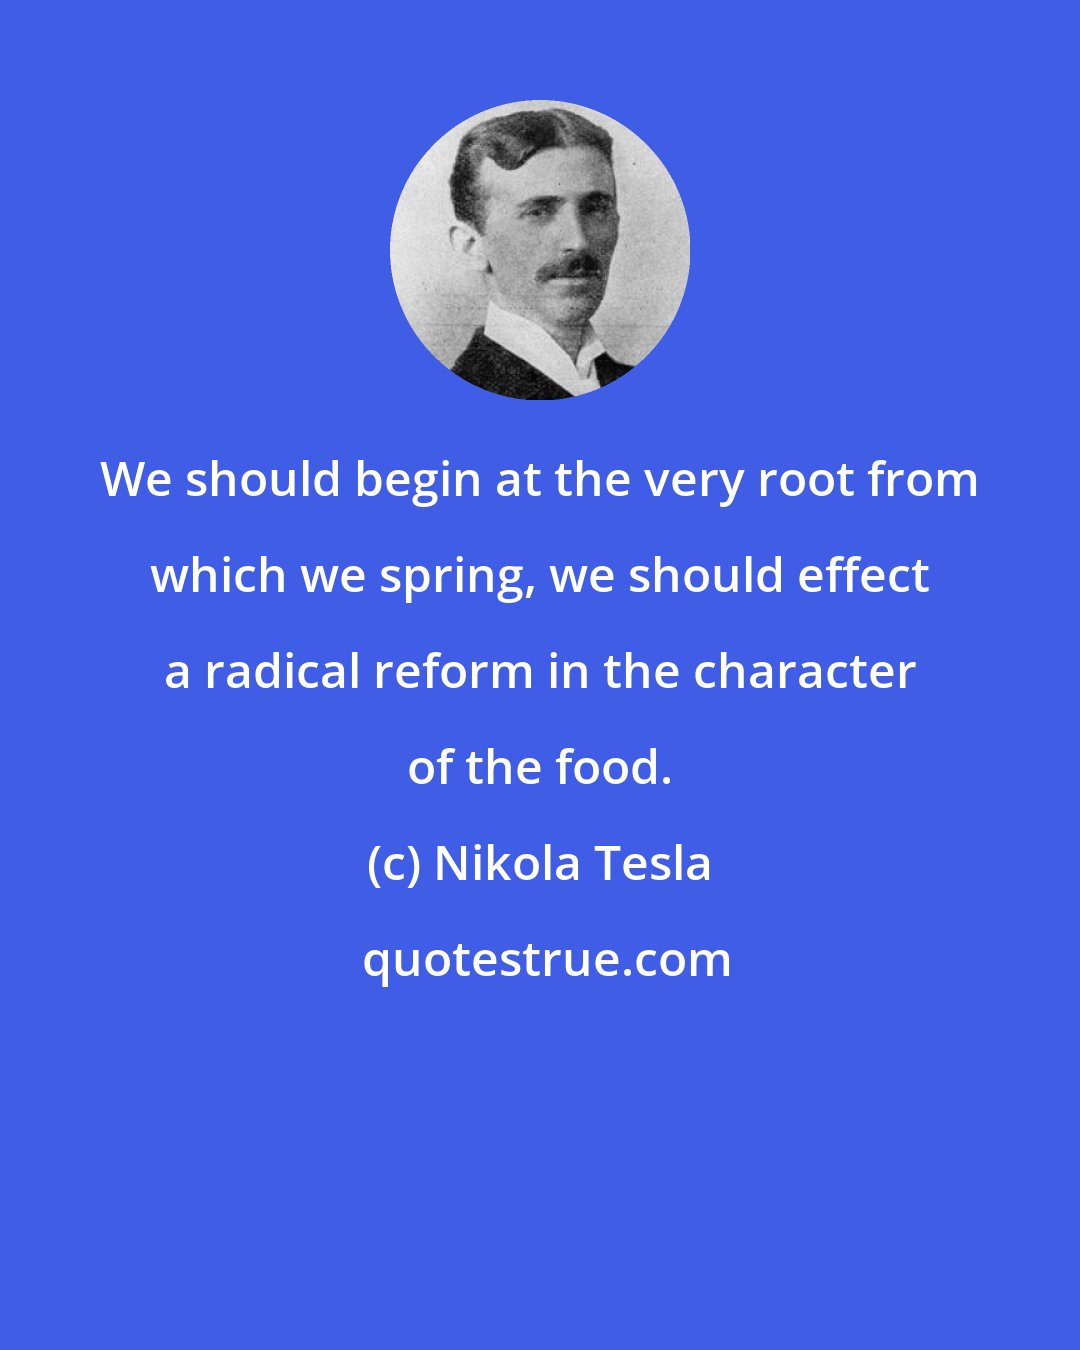 Nikola Tesla: We should begin at the very root from which we spring, we should effect a radical reform in the character of the food.